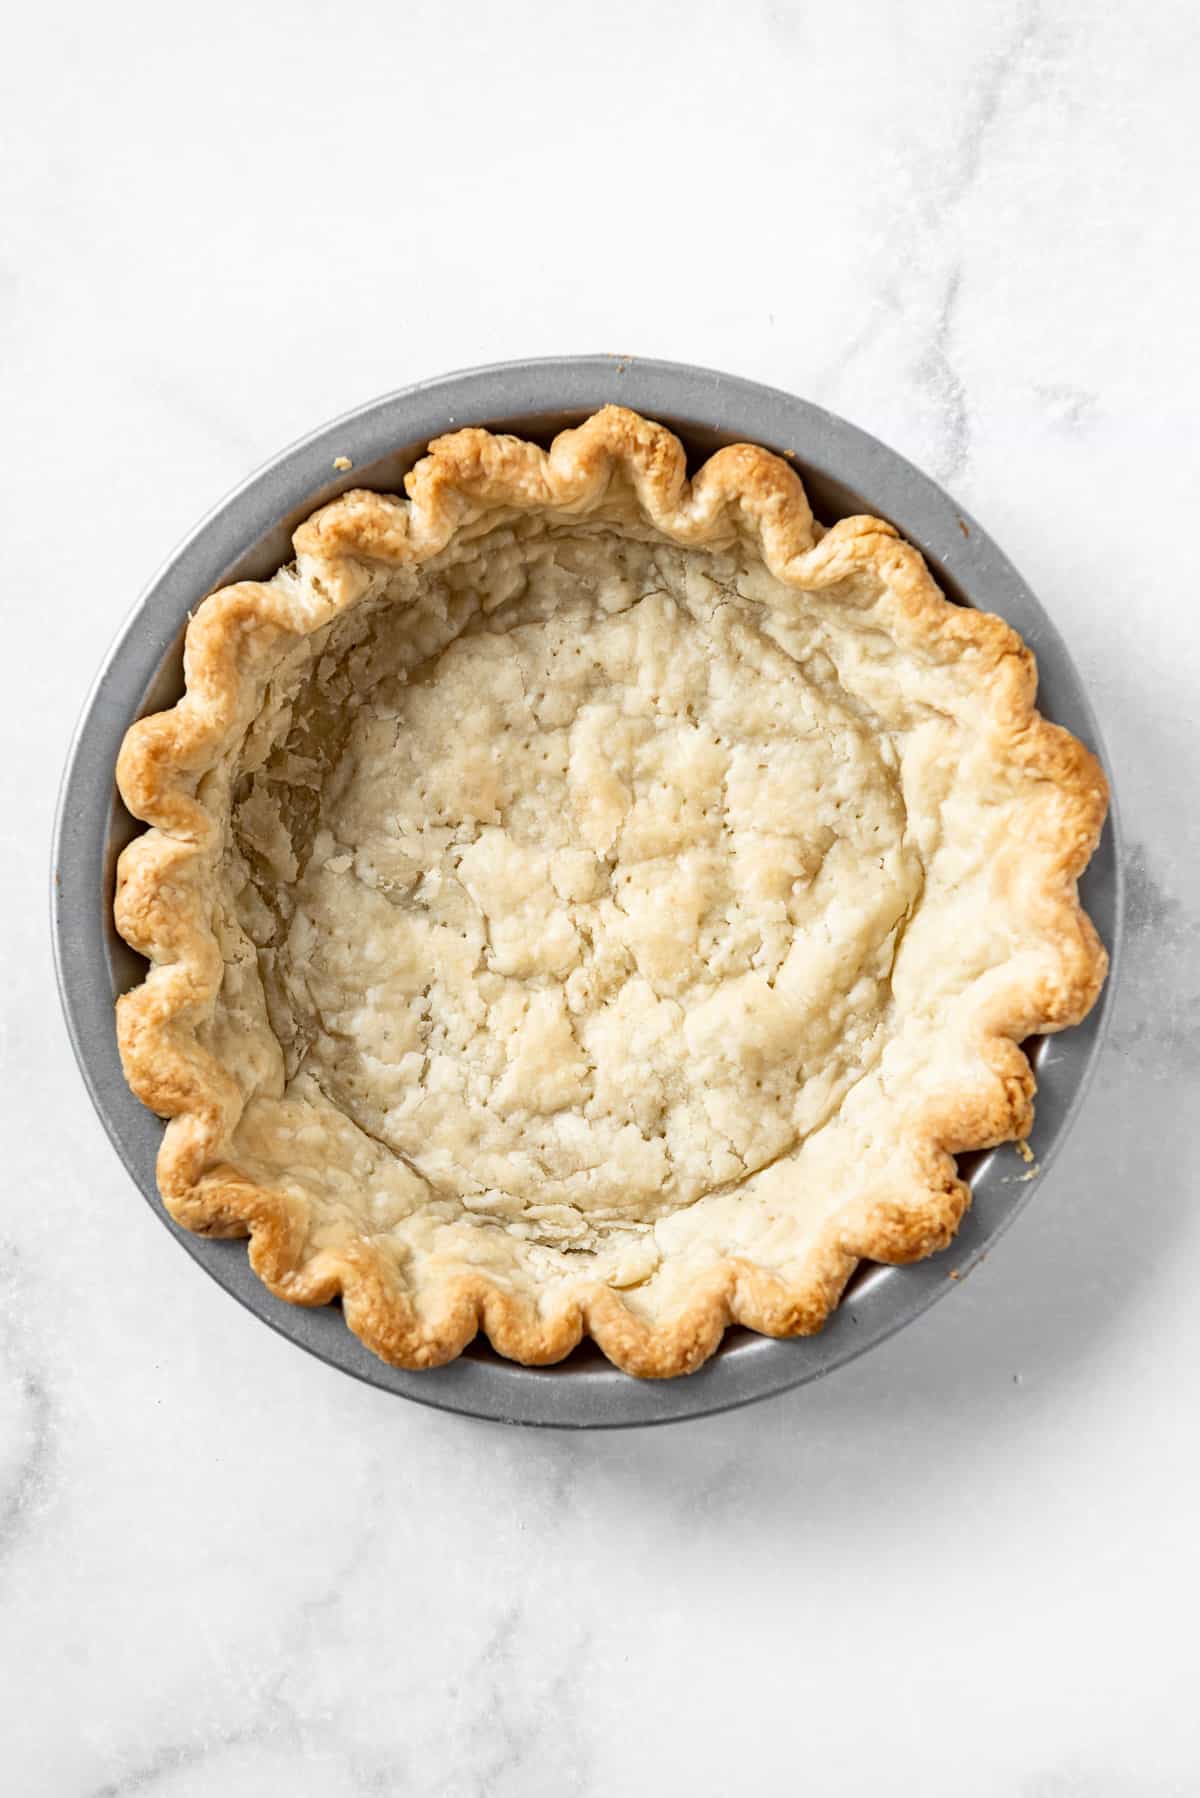 A full-baked homemade pie crust in a metal pie plate.